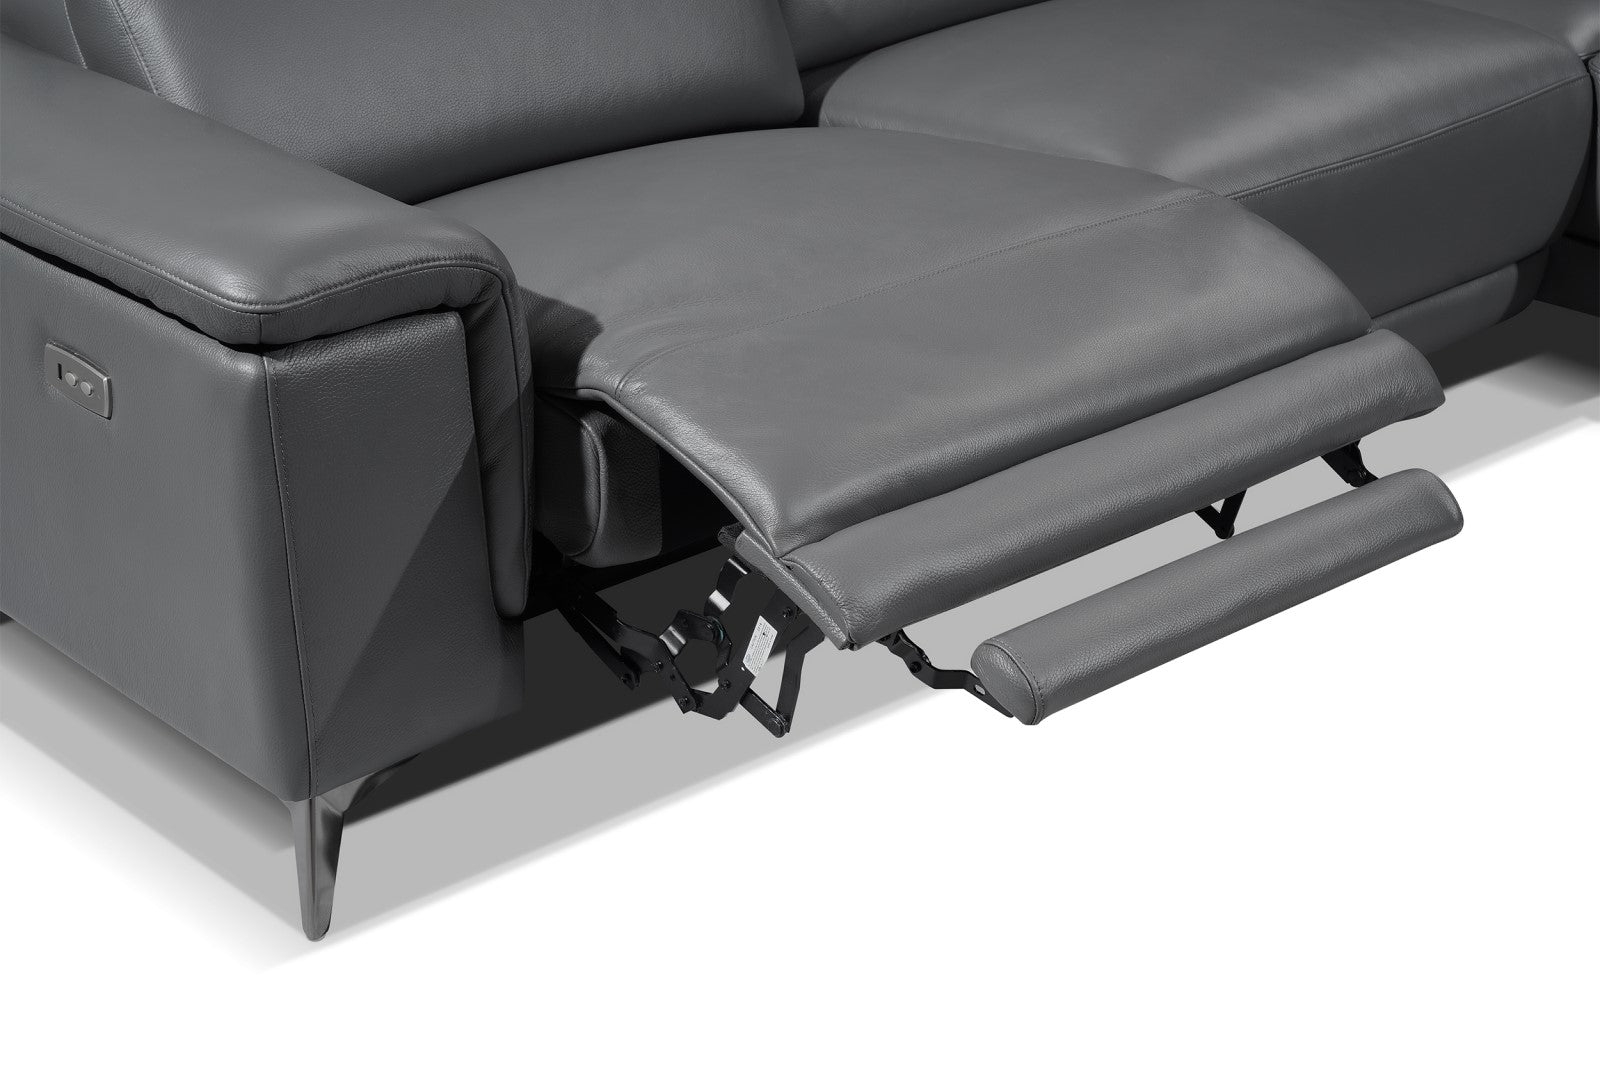 Right-Side's Recliner On Close-Up View of A Luxurious, Grey, Solid Wood Frame with Steel Frame, Pista Modern Top Grain Leather Reclining Sectional Sofa with Right-Hand Facing Chaise.